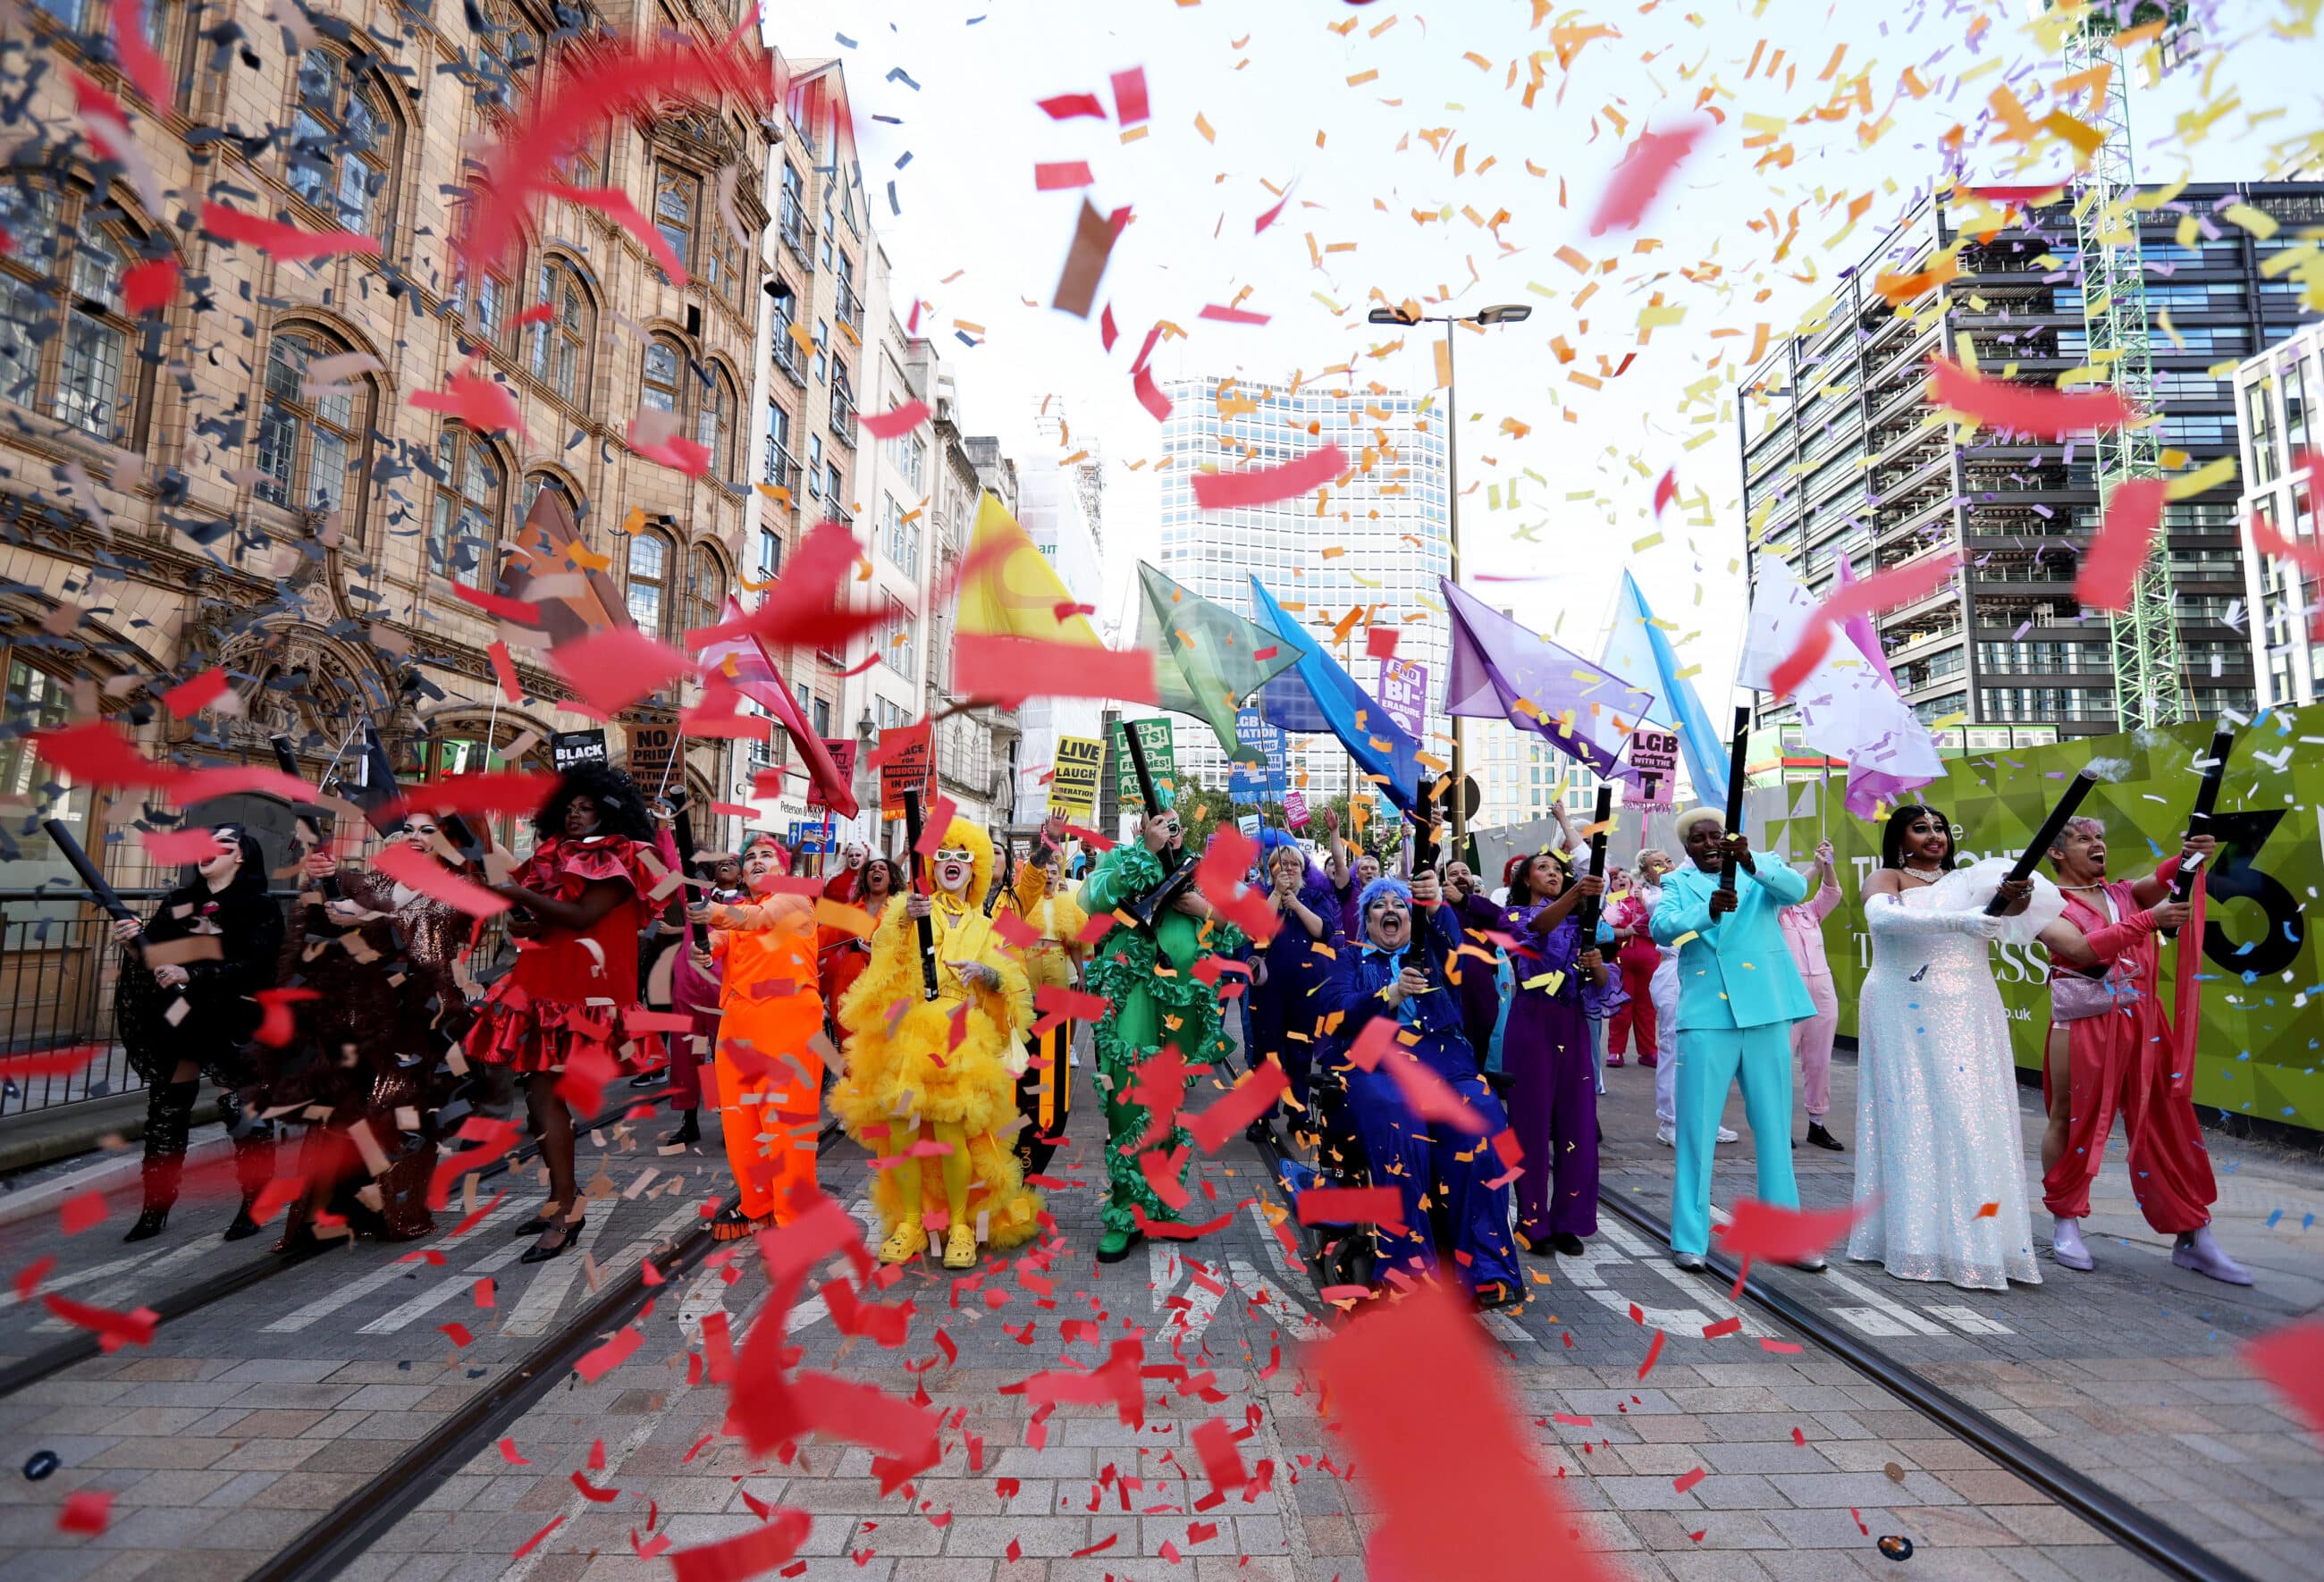 Performers dressed in bright rainbow clothing and waving colored rainbow flags march down the street while confetti rains down in the frame.